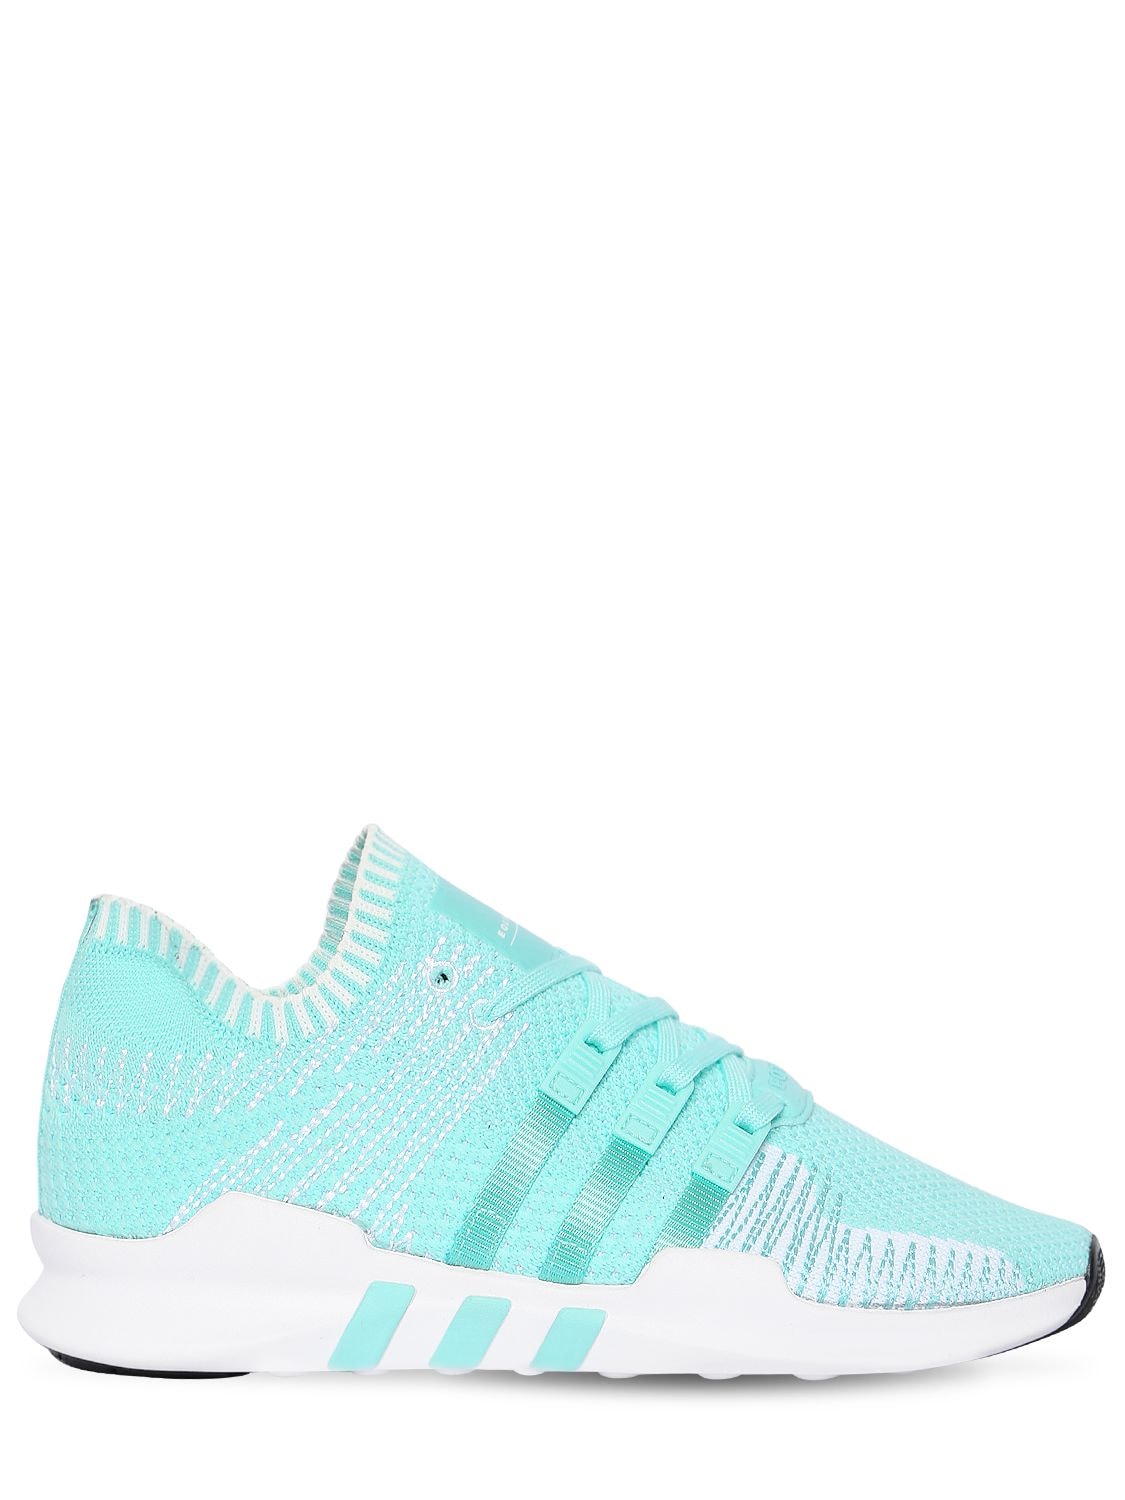 Eqt Support Knit Sneakers